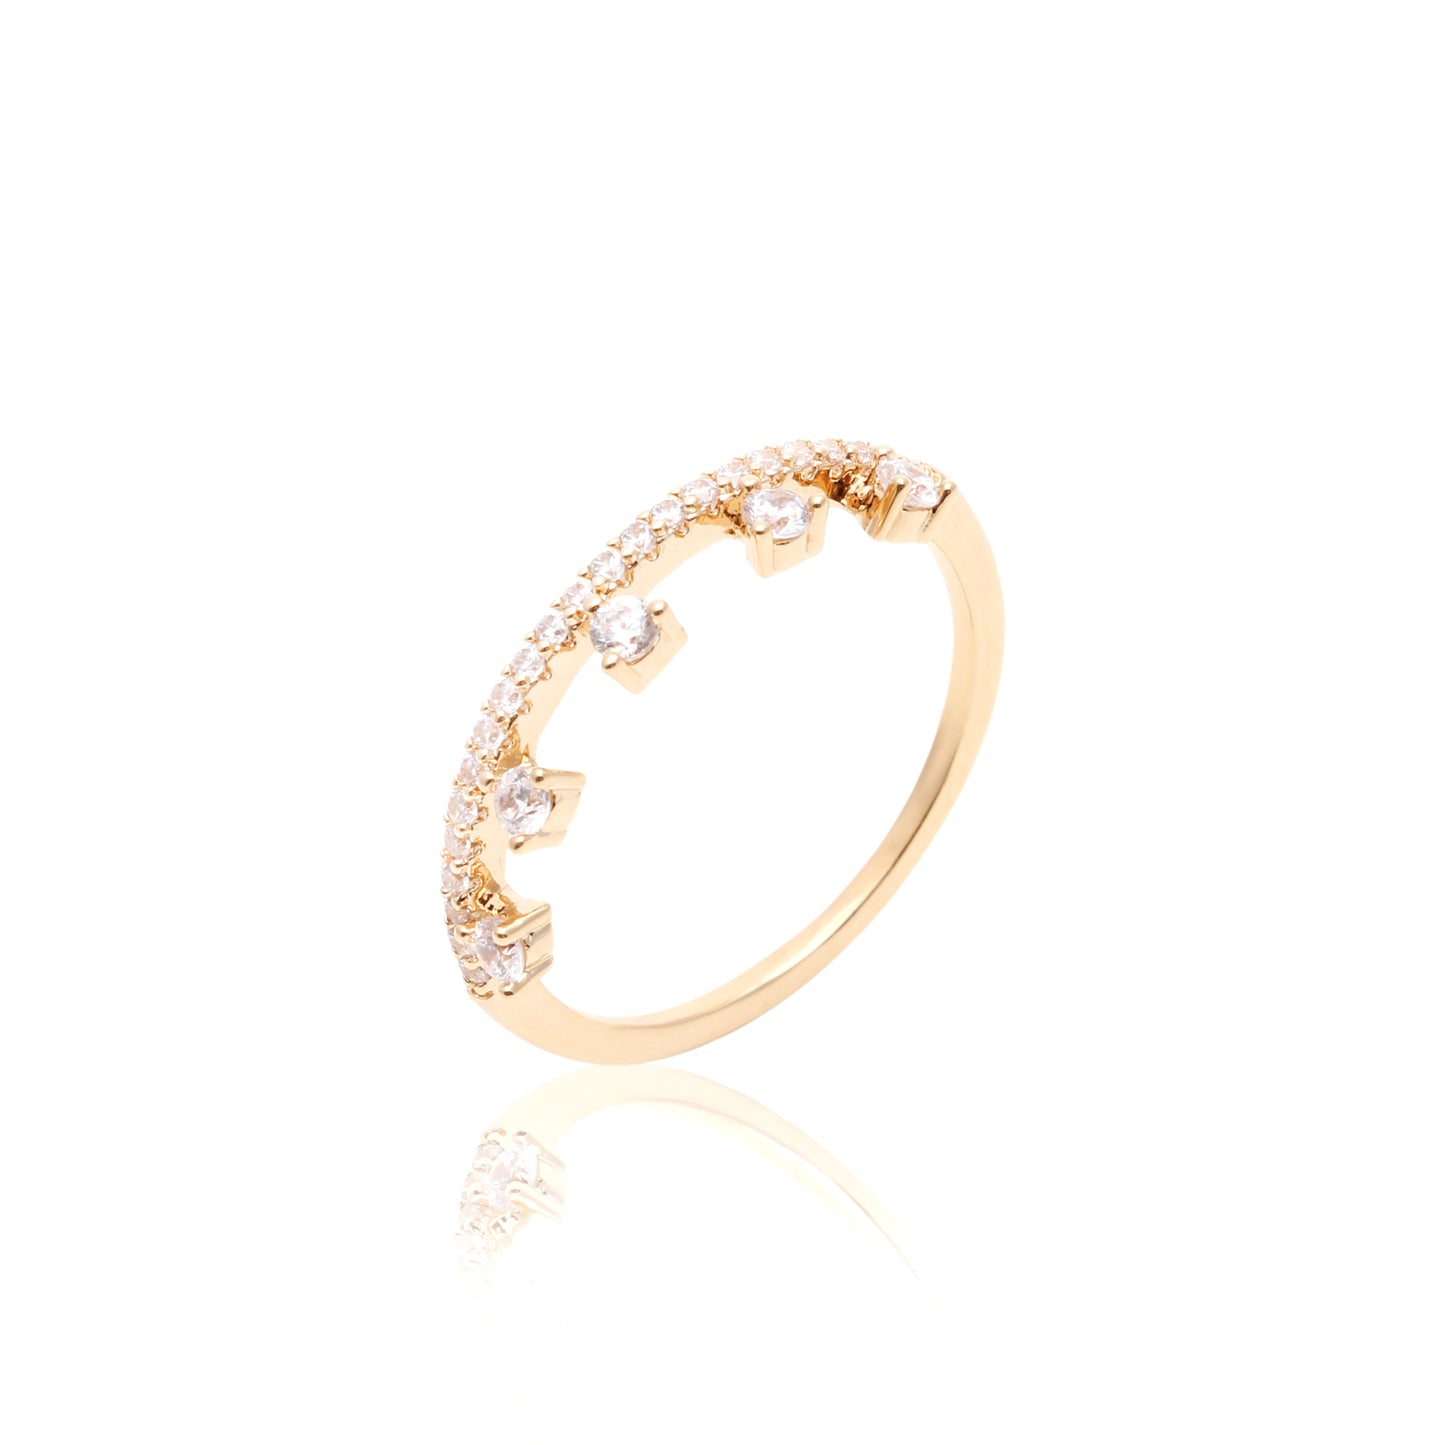 Ring with white zirconia drops in 18K gold